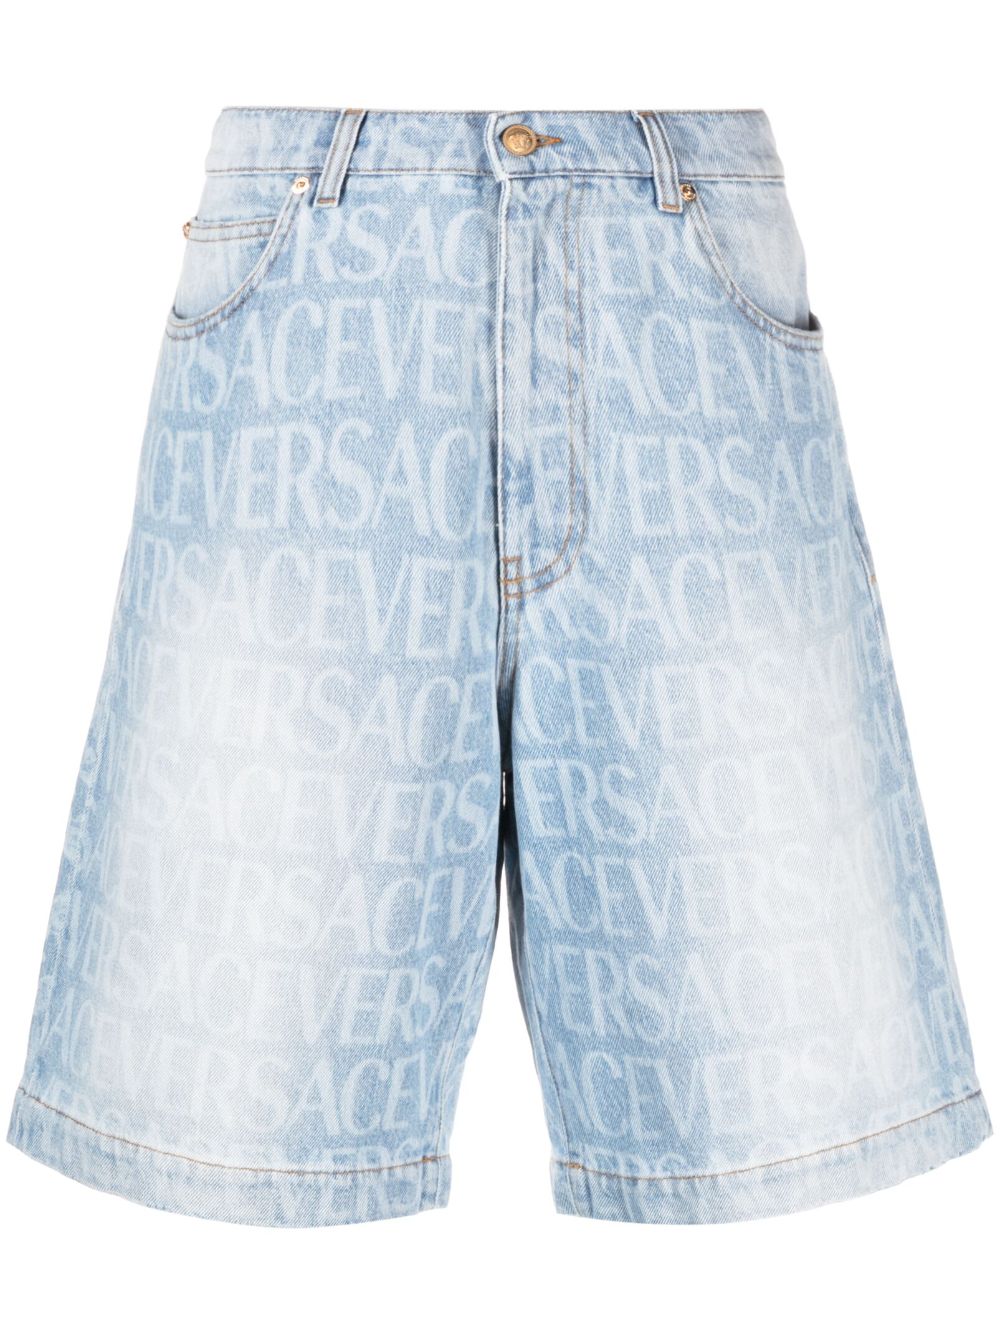 Stylish Denim Shorts with All-Over Versace Motif for Men - FW23